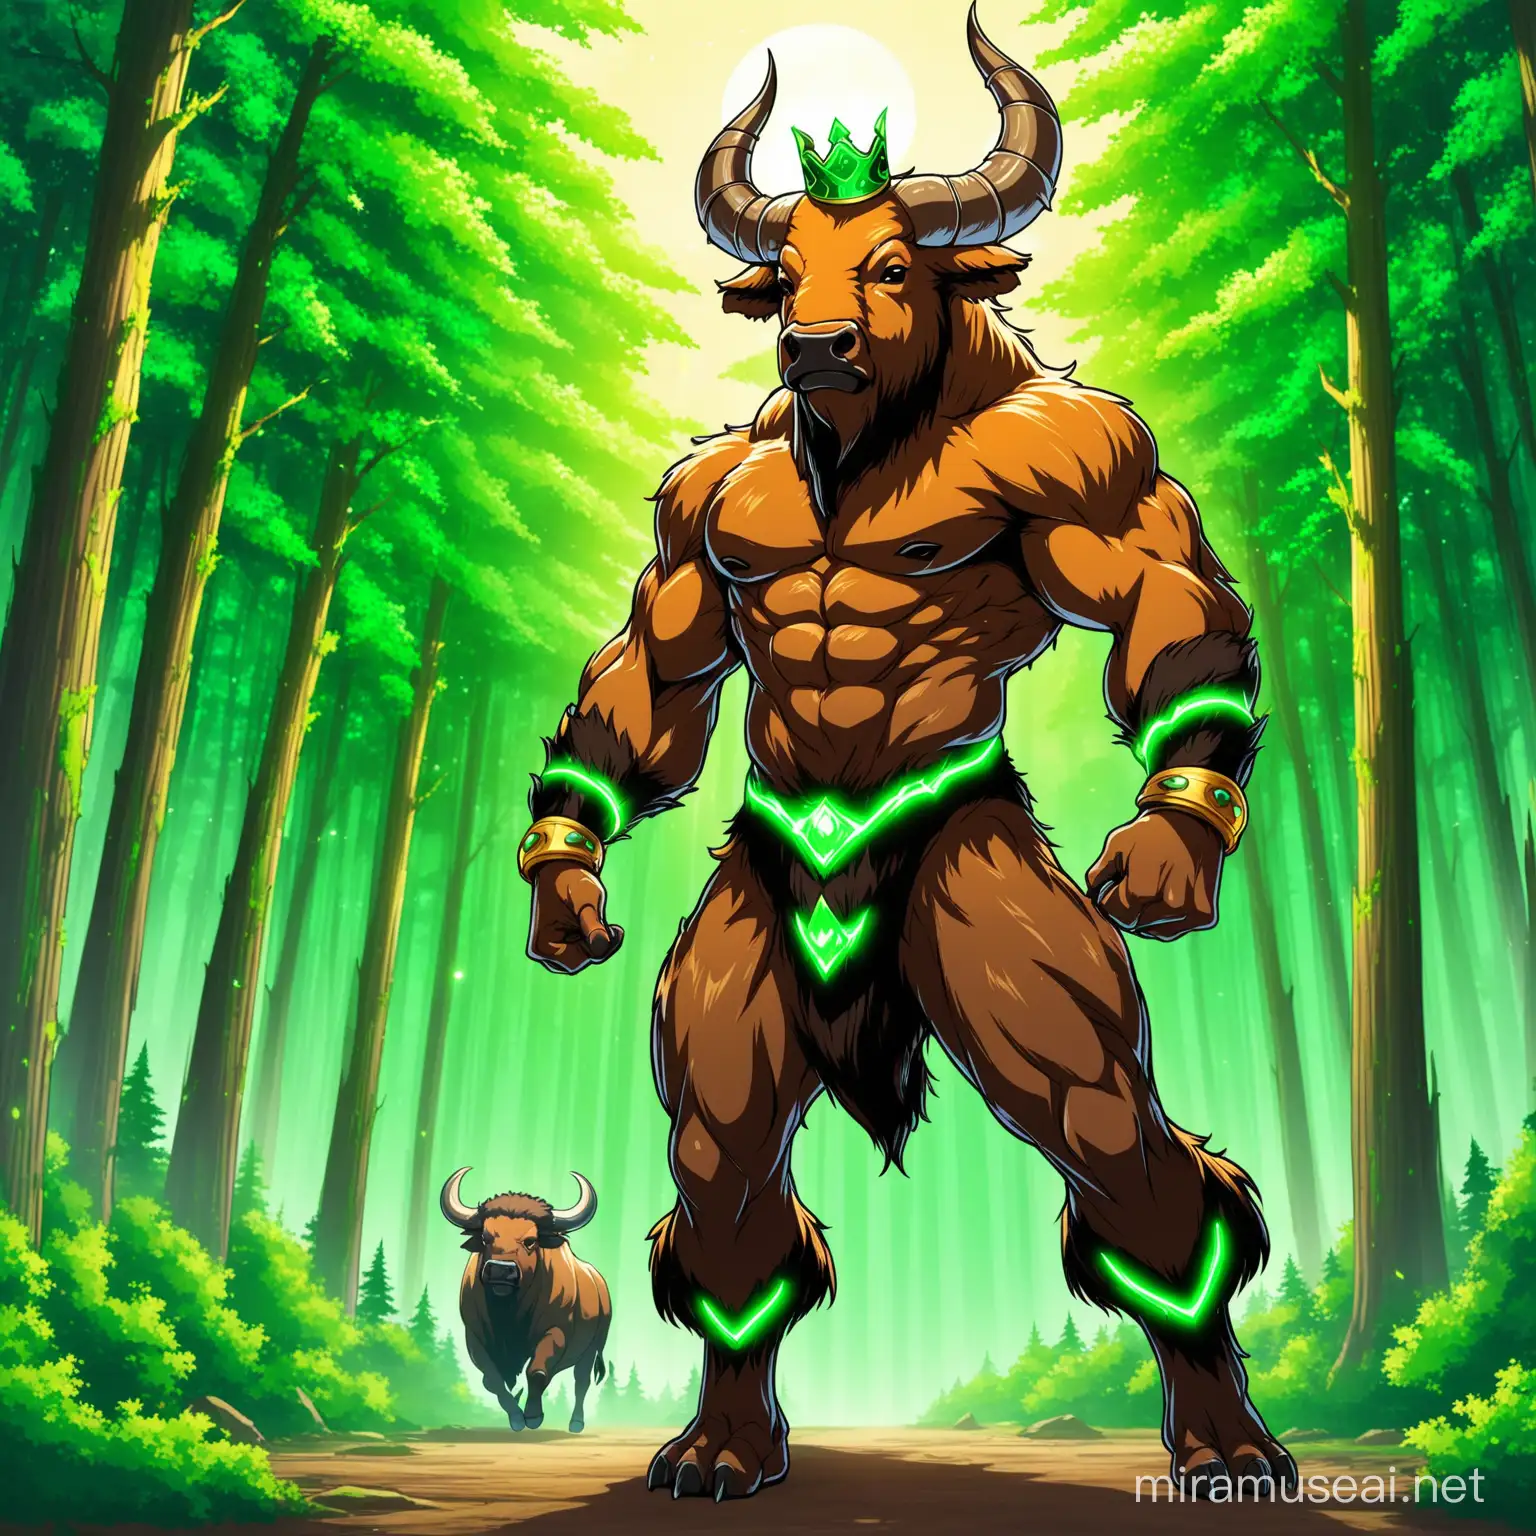 Majestic Neon Green BuffaloKing in a Dynamic Forest Setting